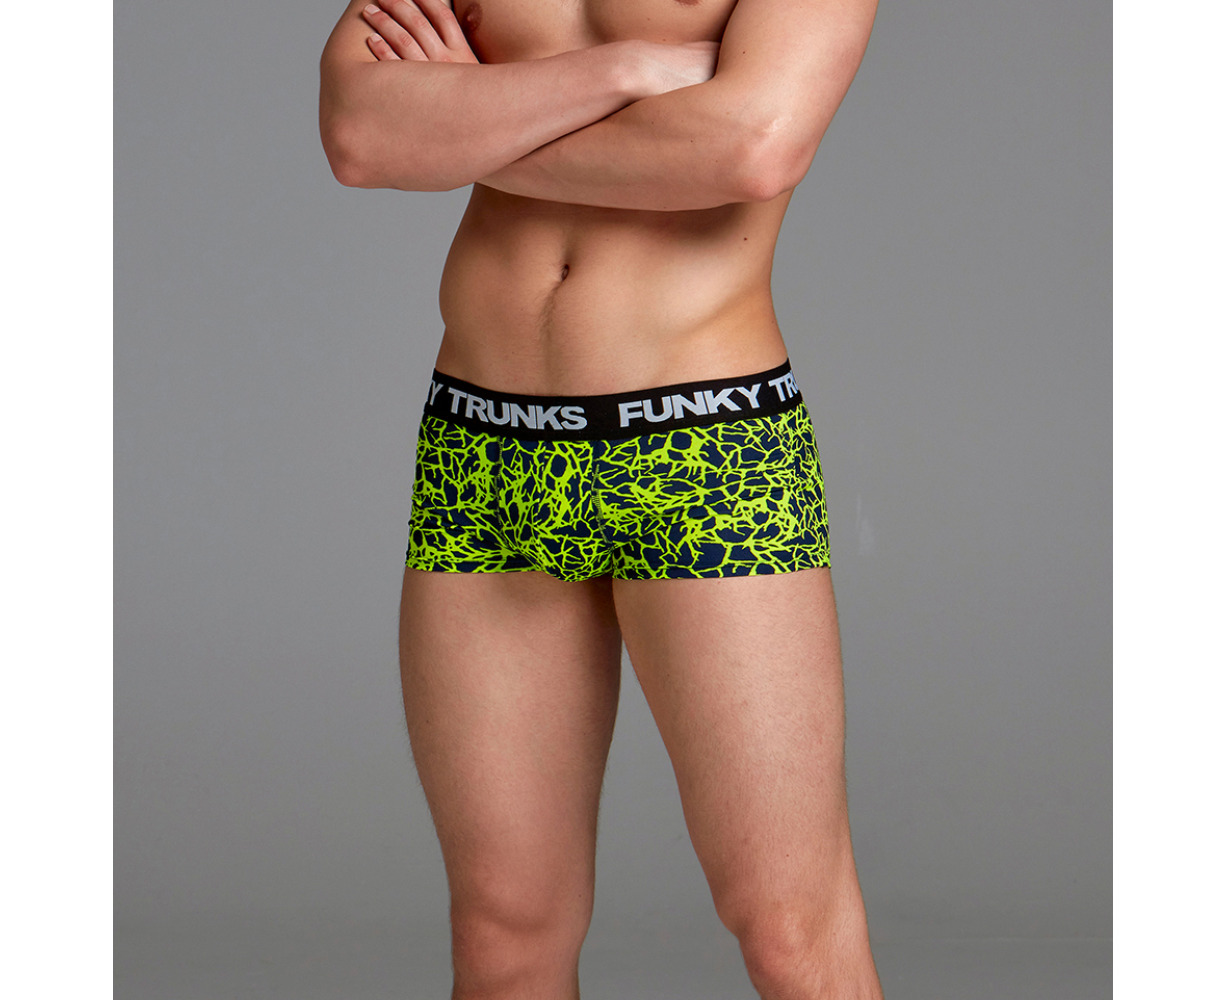 Funky Trunks Underwear Cotton Trunks Coral Gold